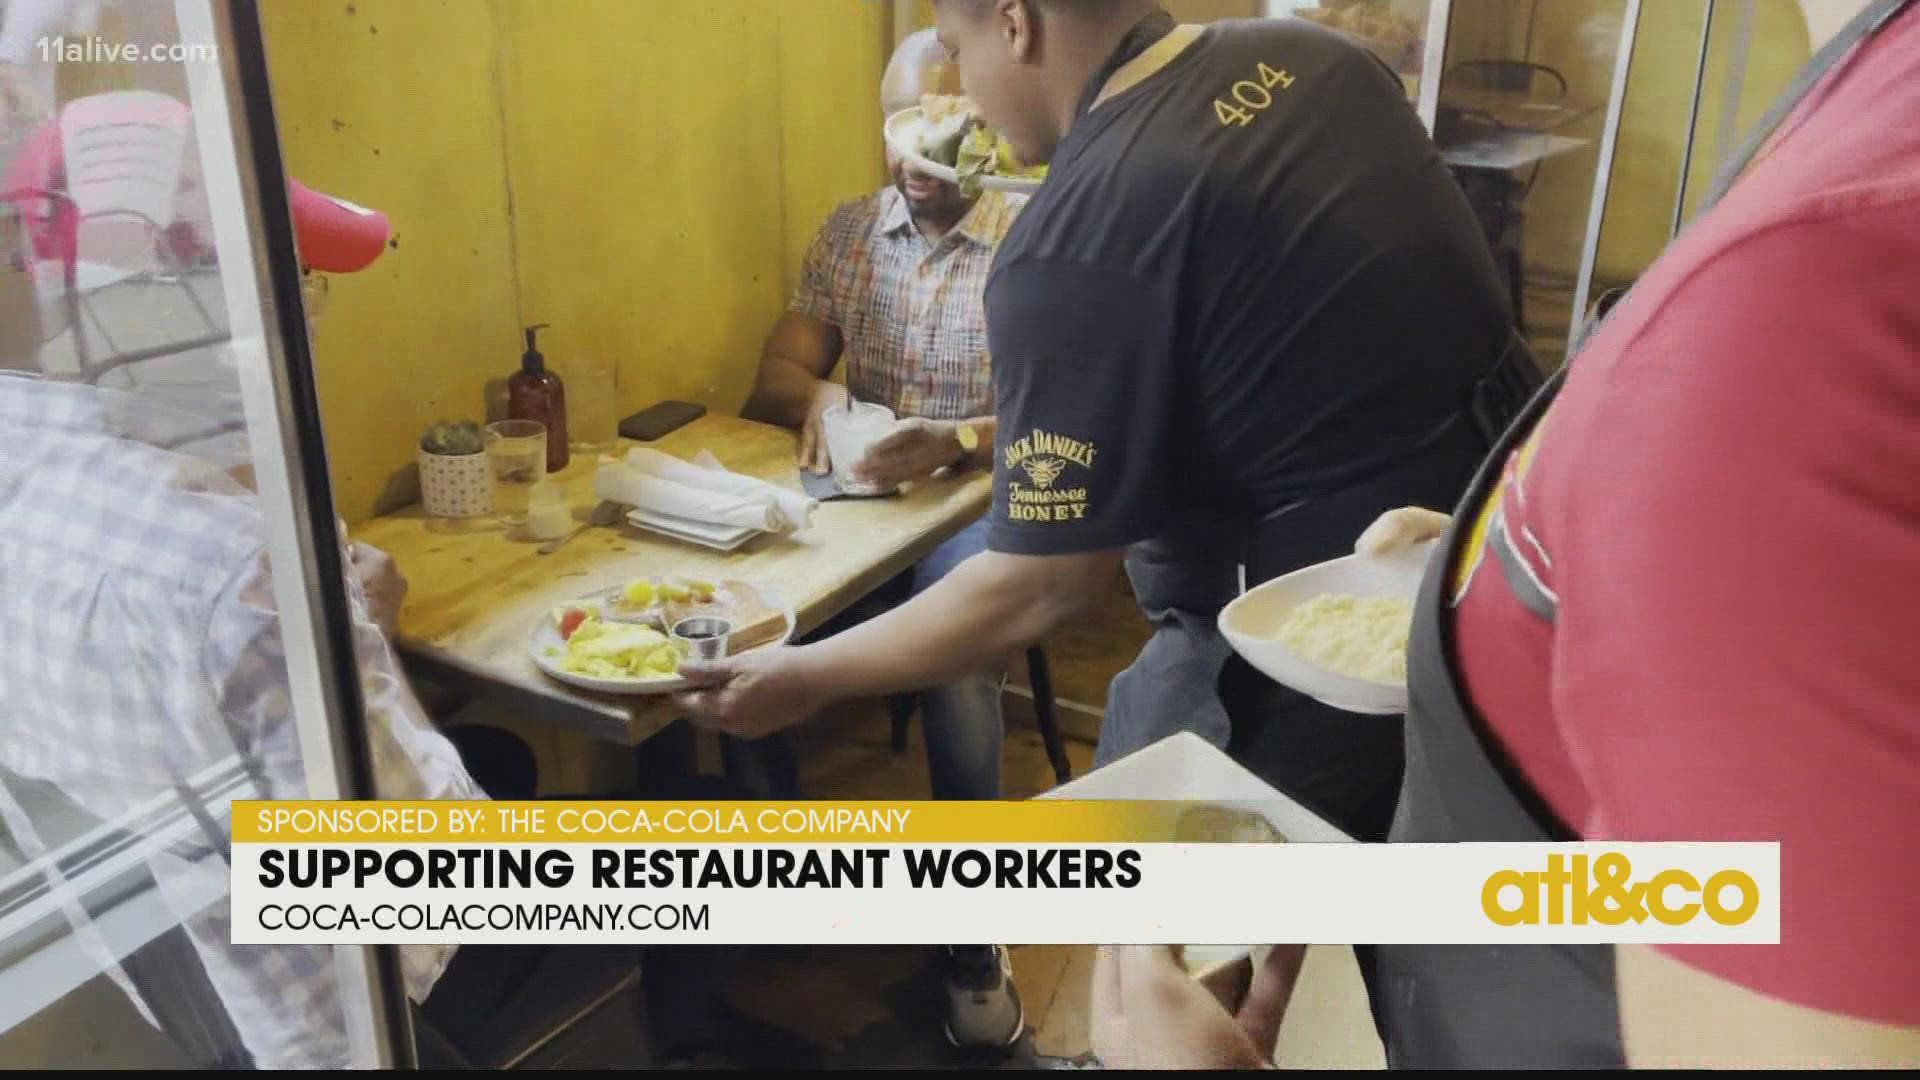 Coca-Cola surprised the staff of local eatery Twisted Soul Cookhouse & Pours with a $10,000 tip.